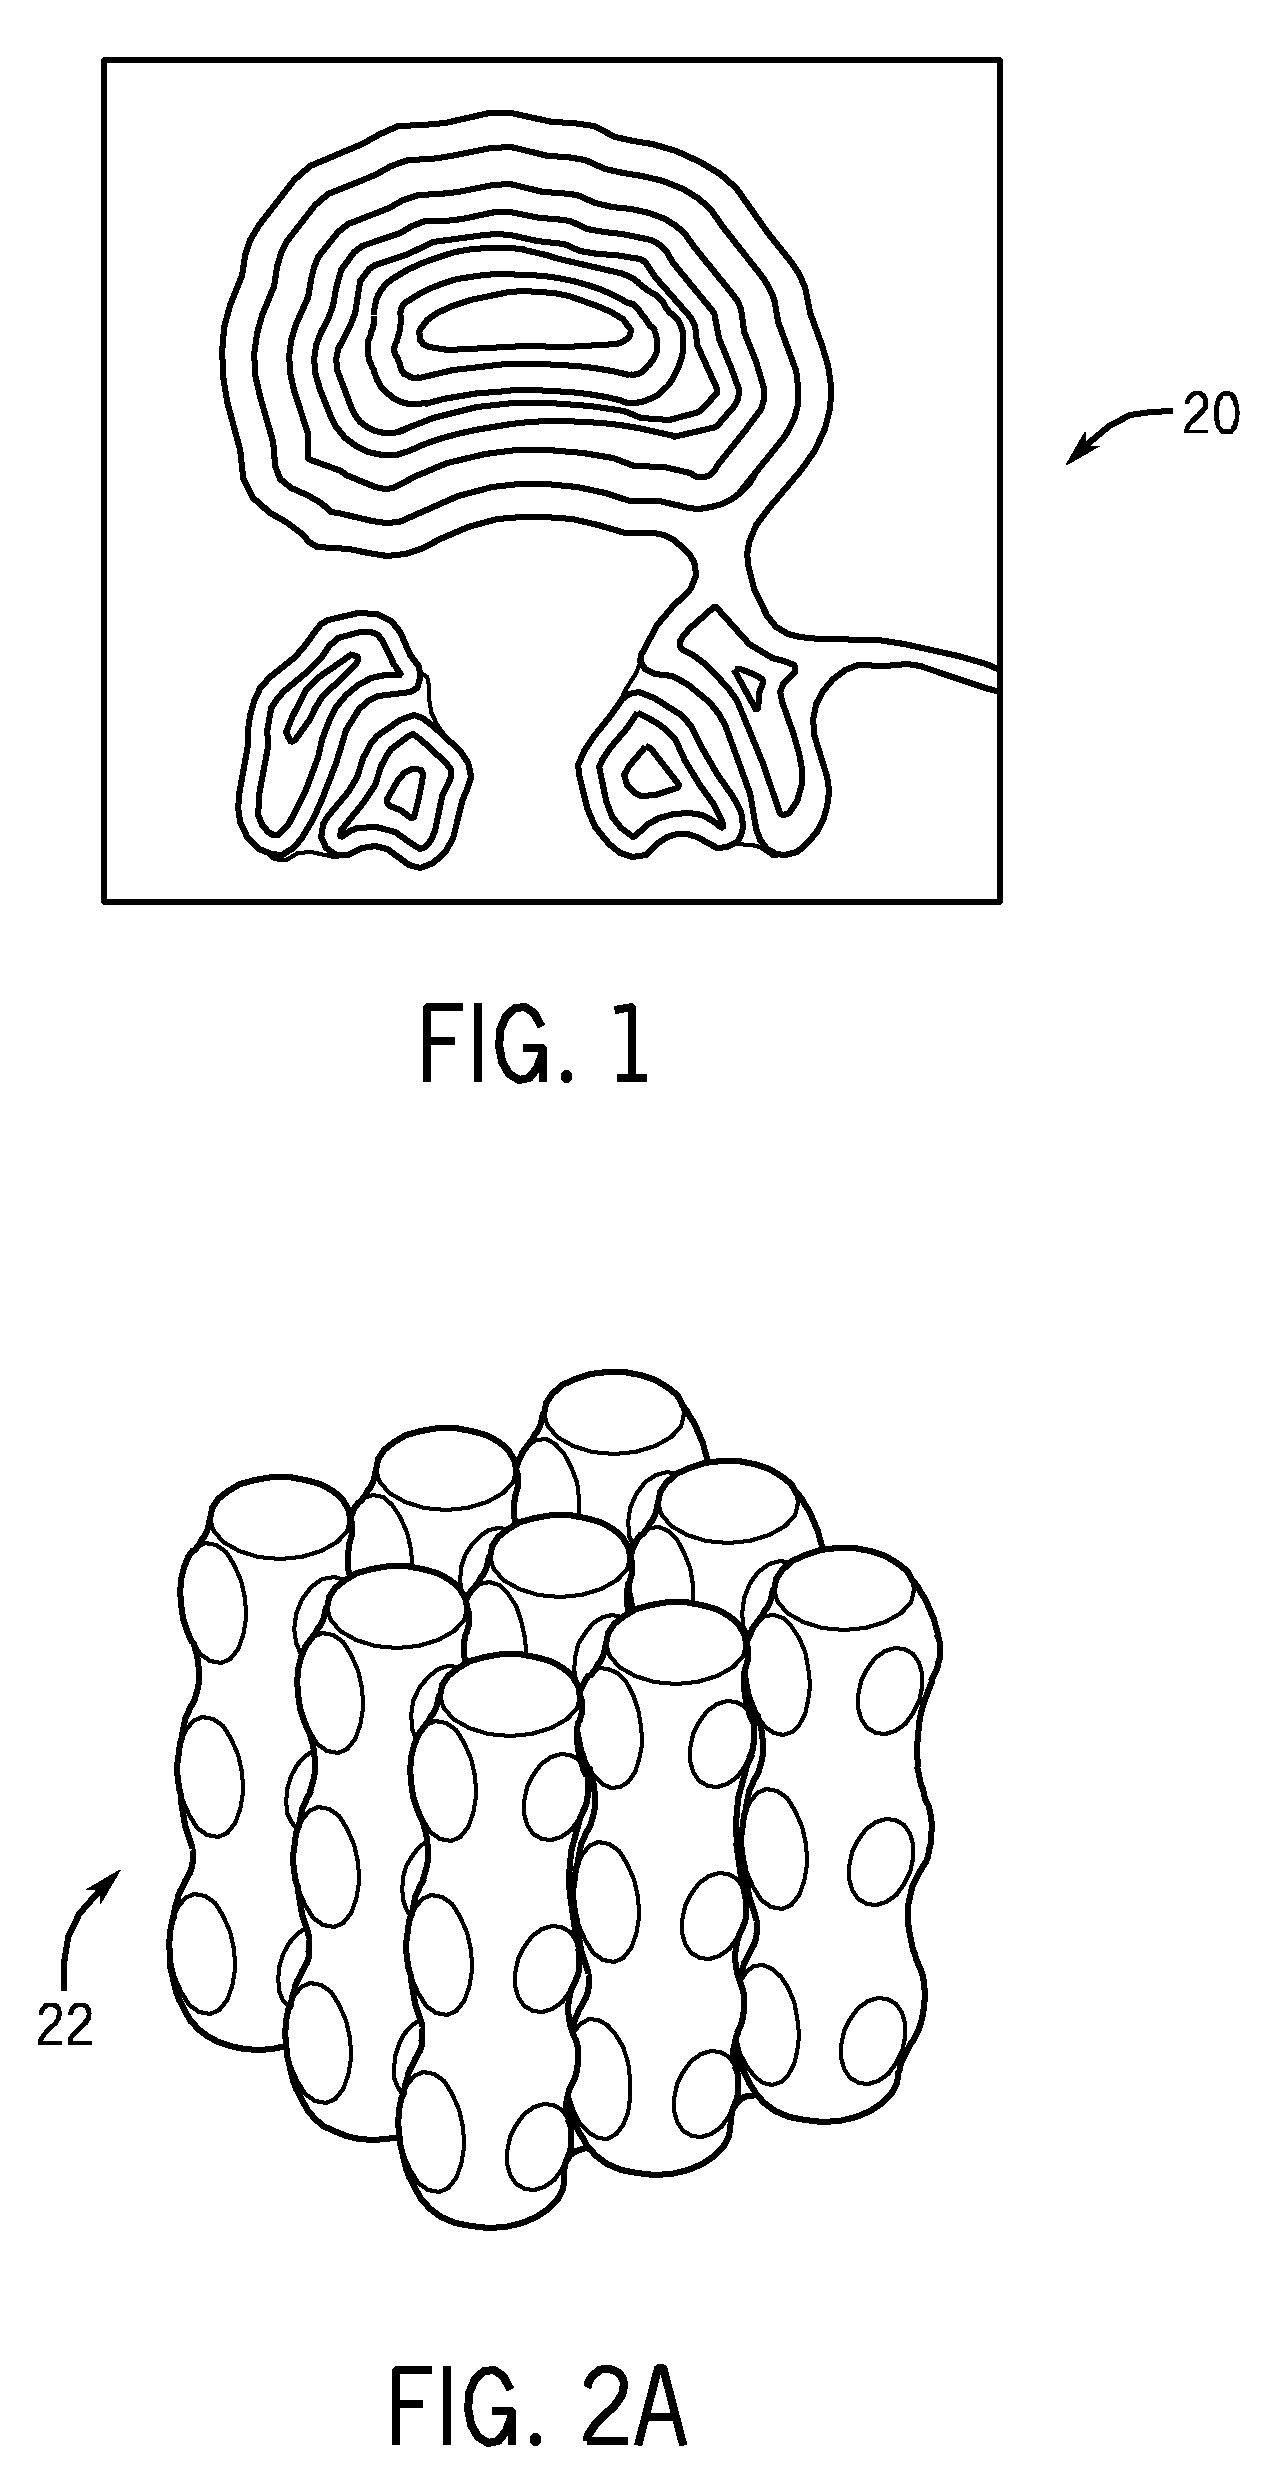 Engineered scaffolds for intervertebral disc repair and regeneration and for articulating joint repair and regeneration